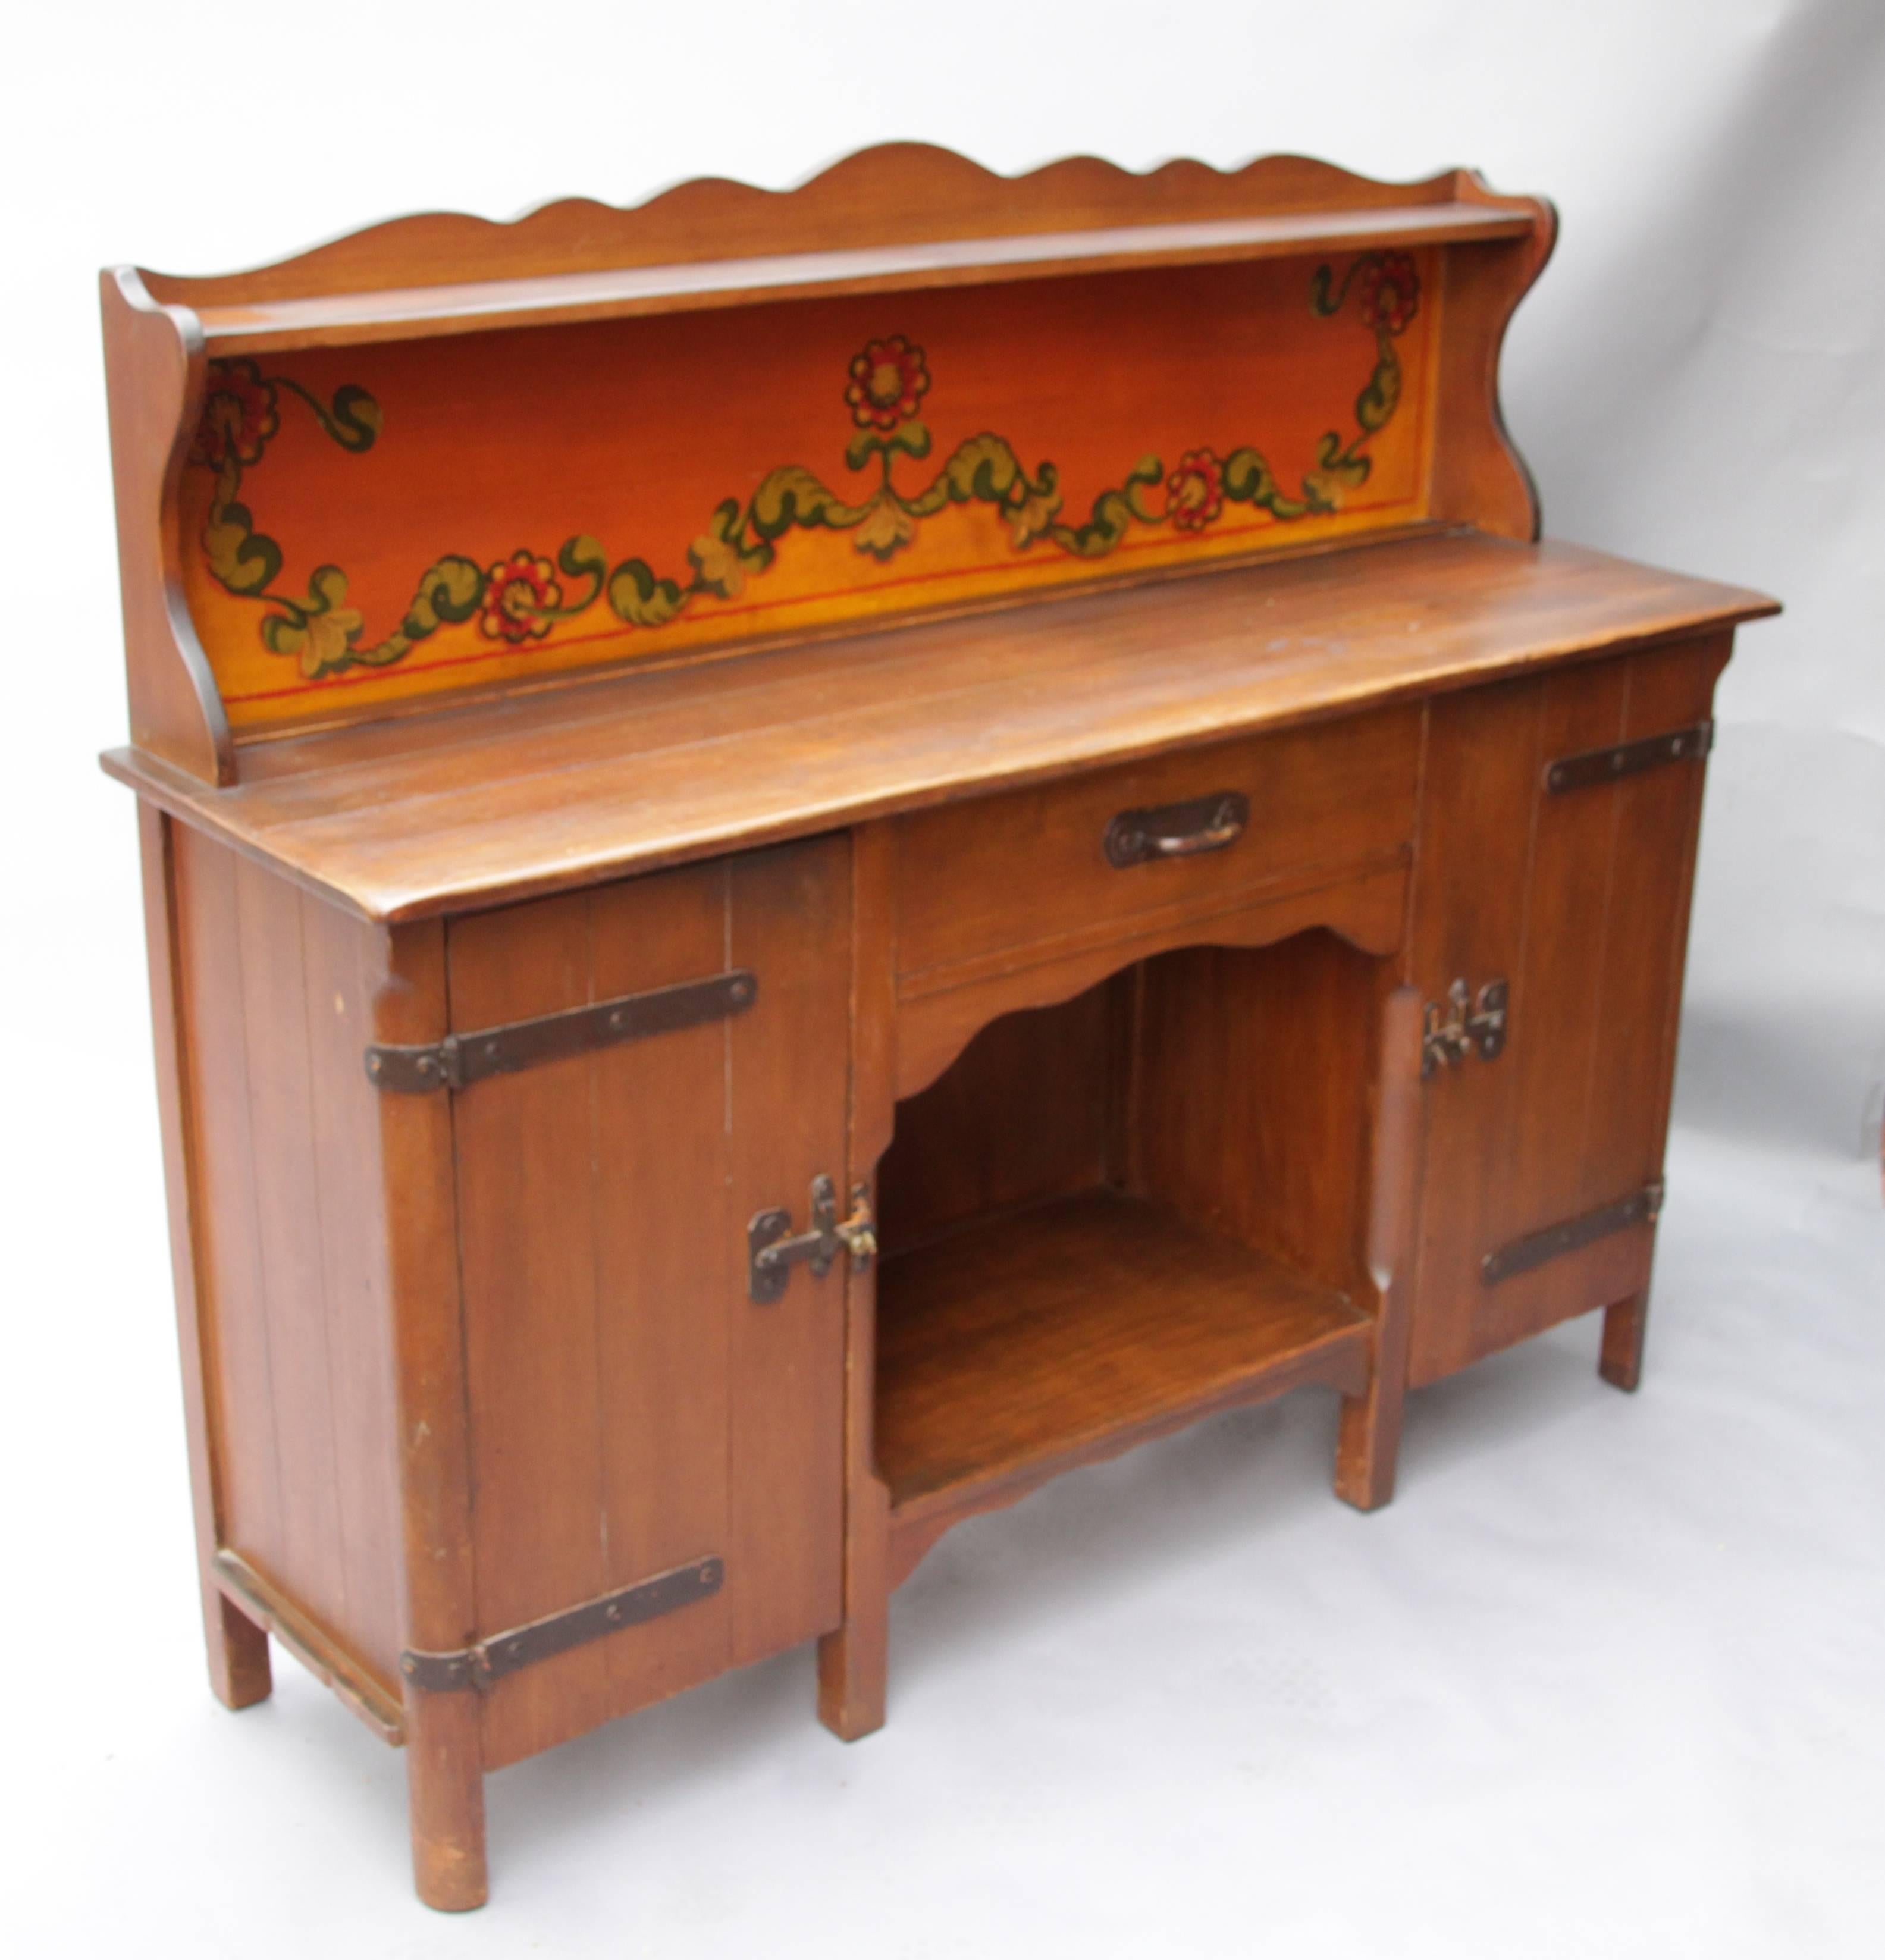 Signed Monterey sideboard with original finish and wrought iron hardware.